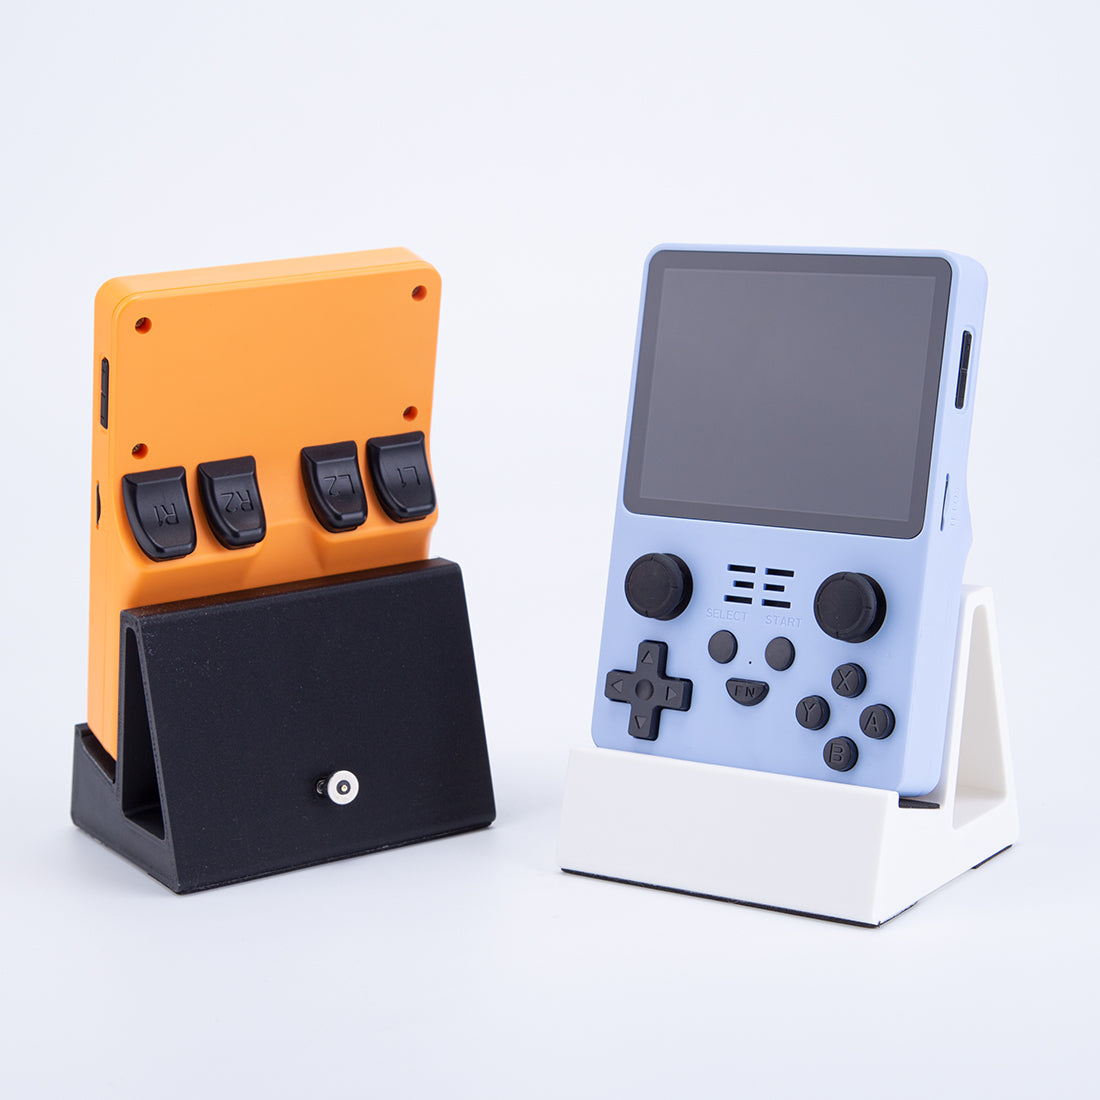 3D Printed Magnetic Charging Dock for RGB20S Handheld Game Consoles